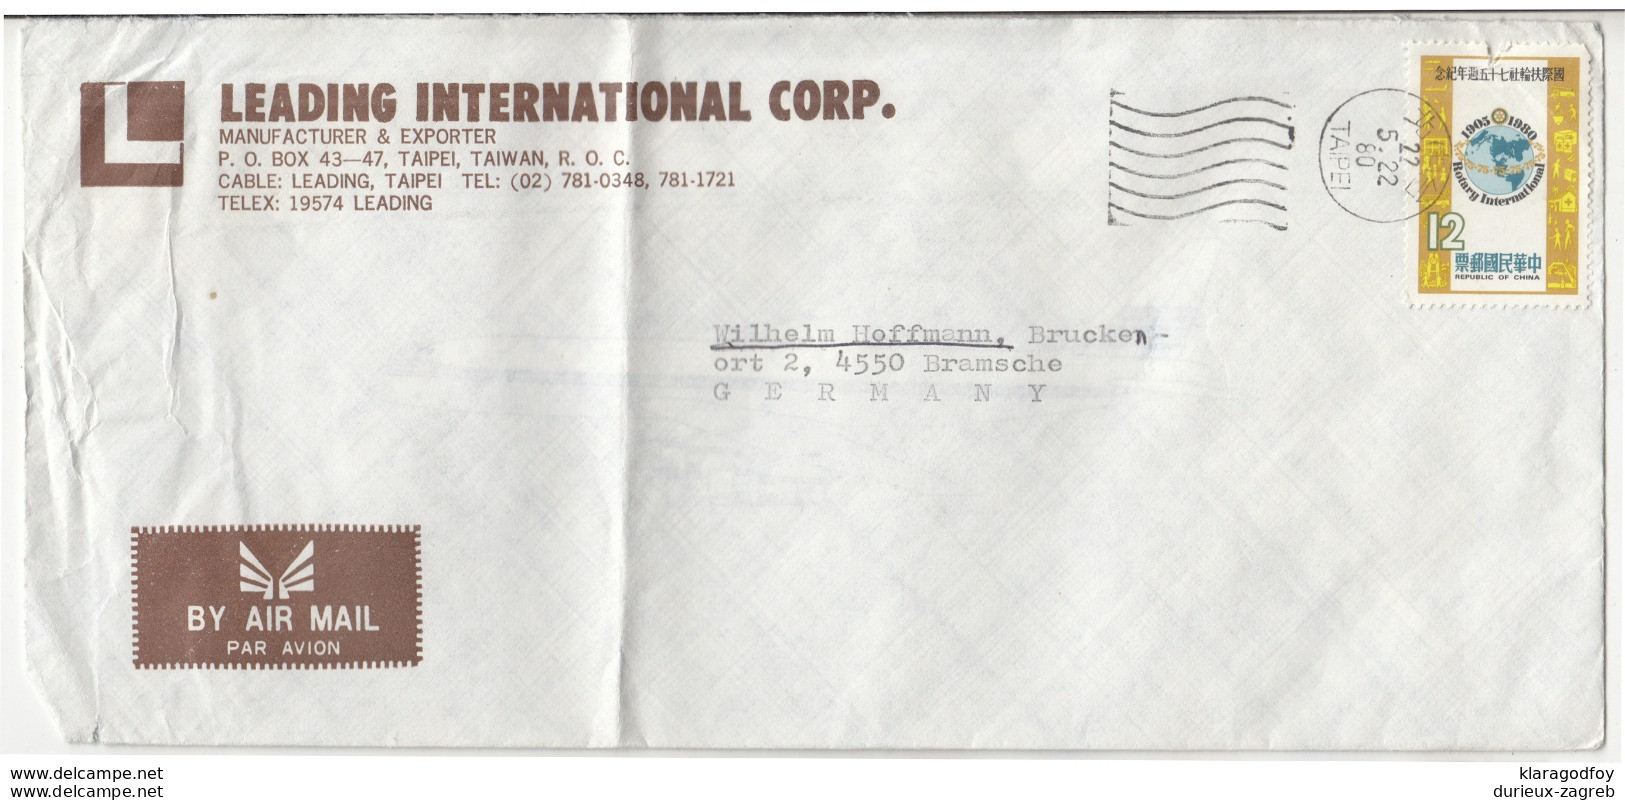 Leading International Taipei Company Air Mail Letter Cover Travelled 1980? To Germany B190922 - Storia Postale